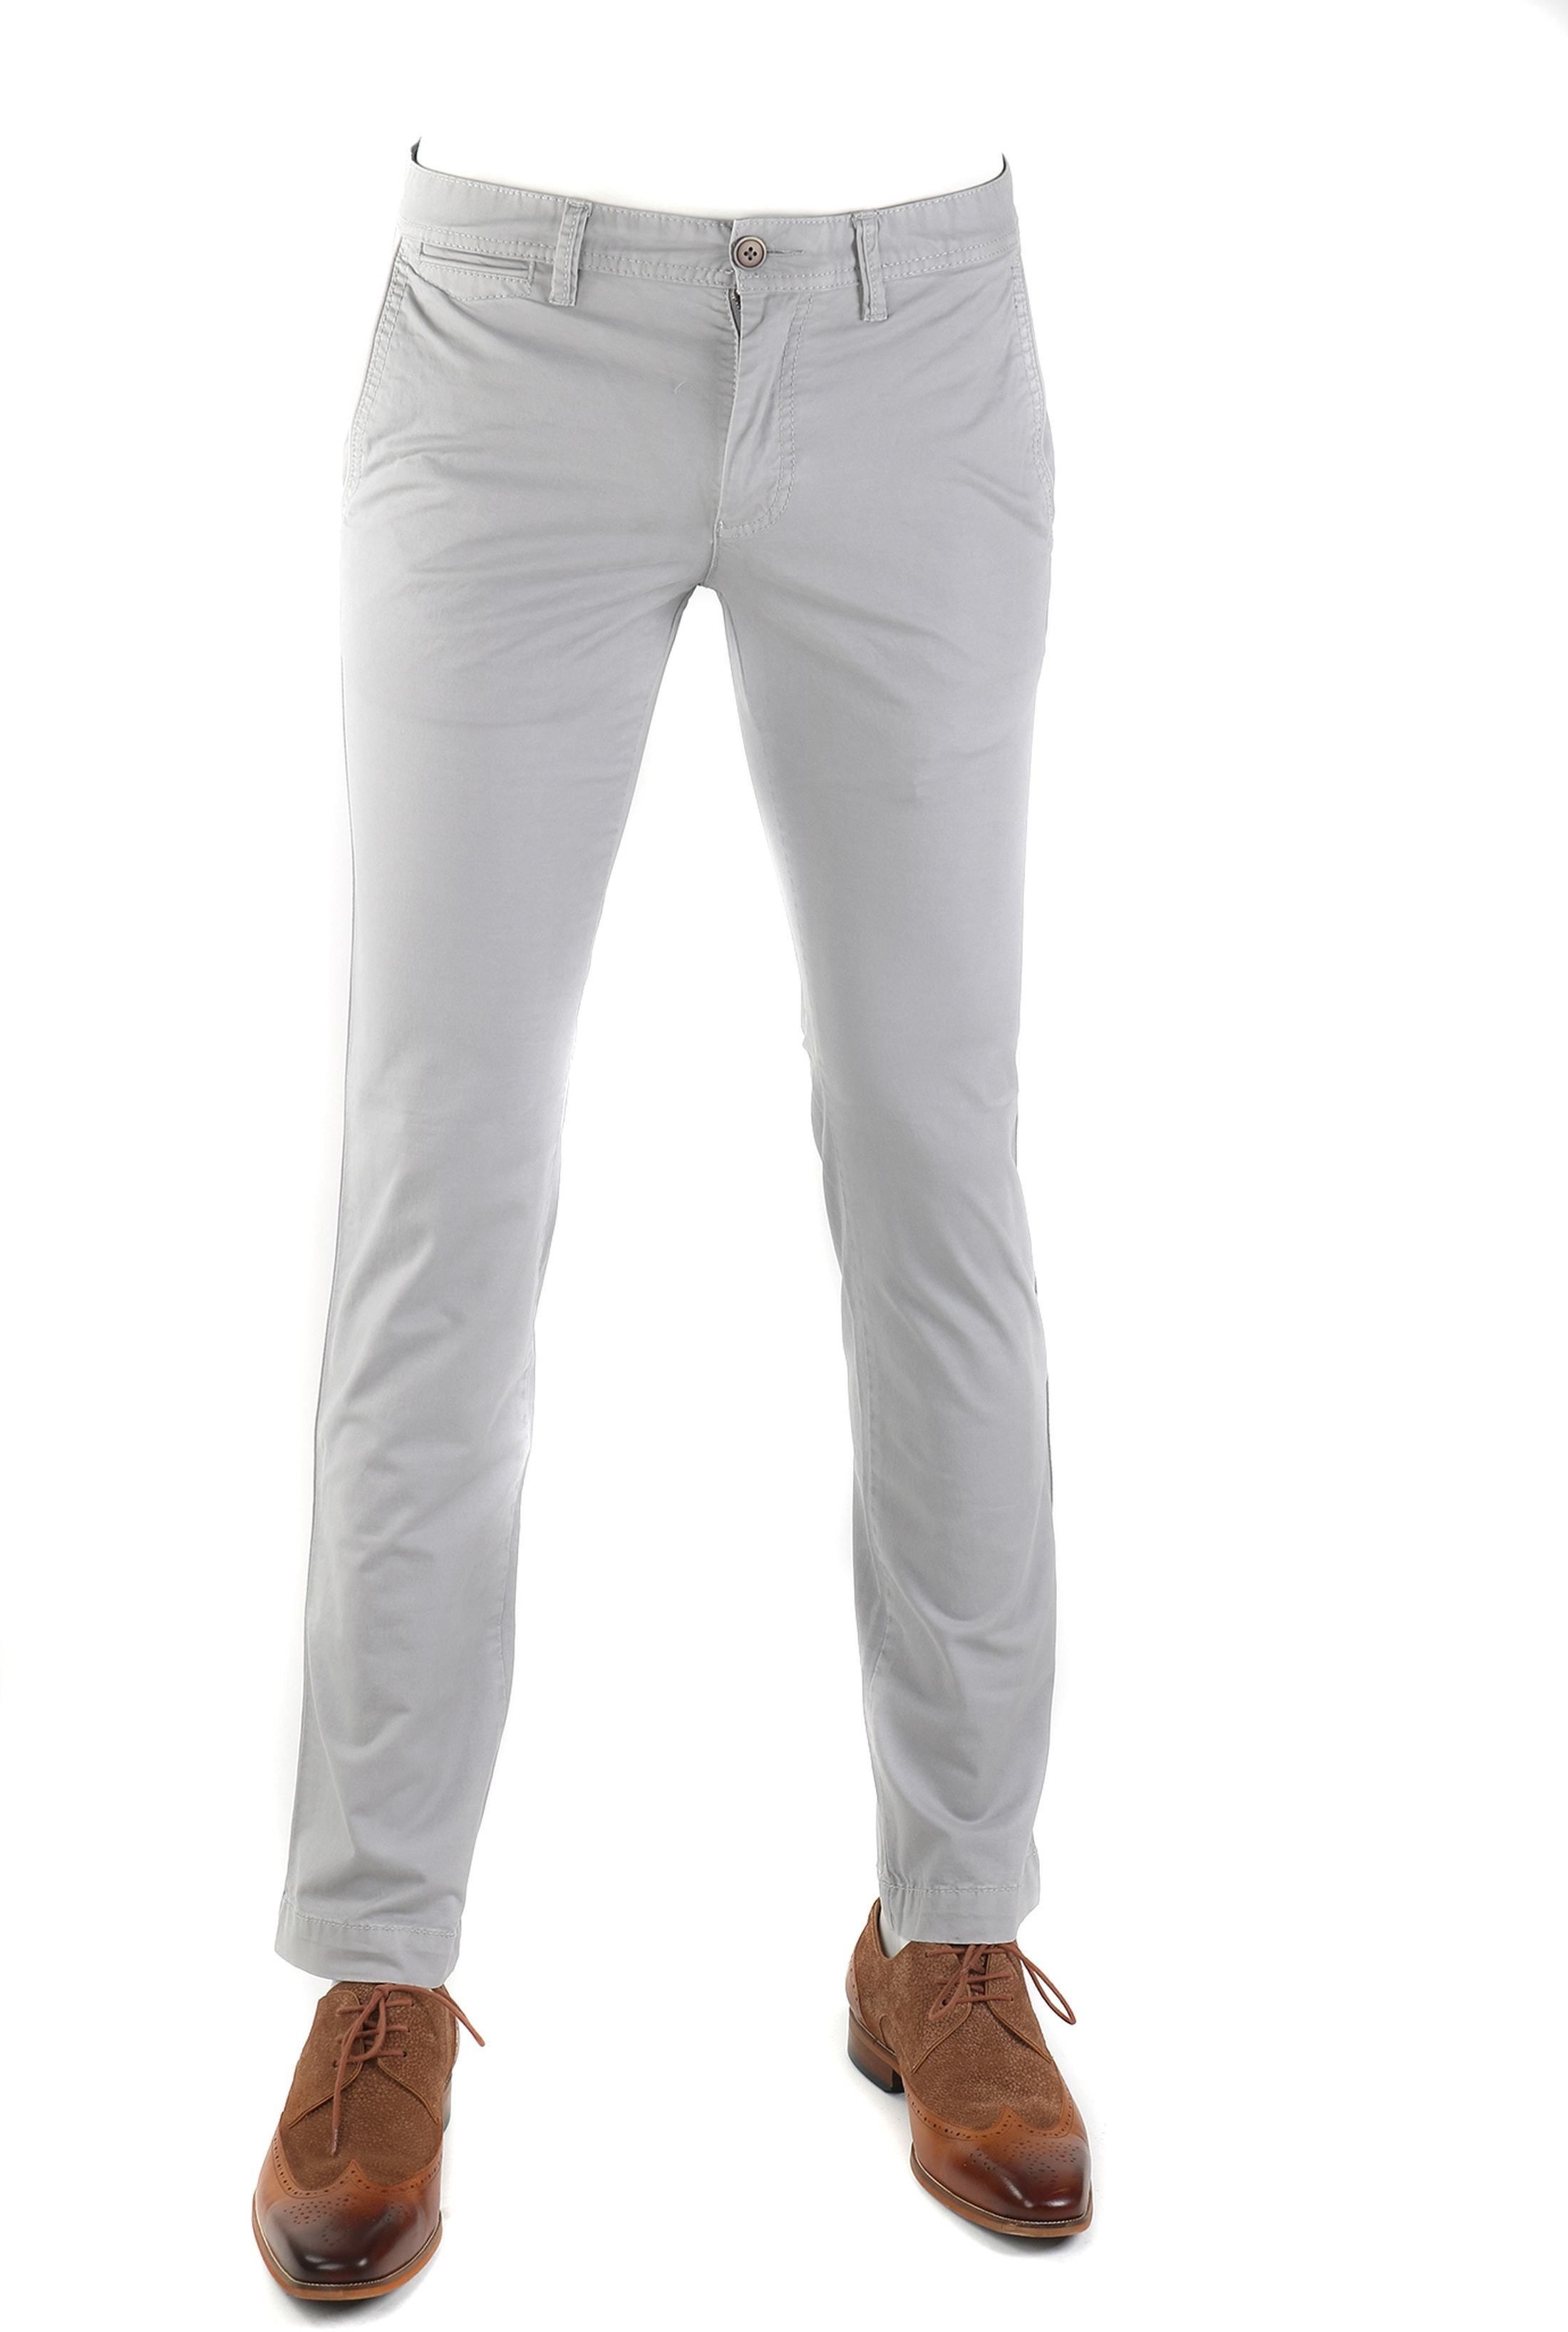 Suitable Oakville Chino Grey size 42-S